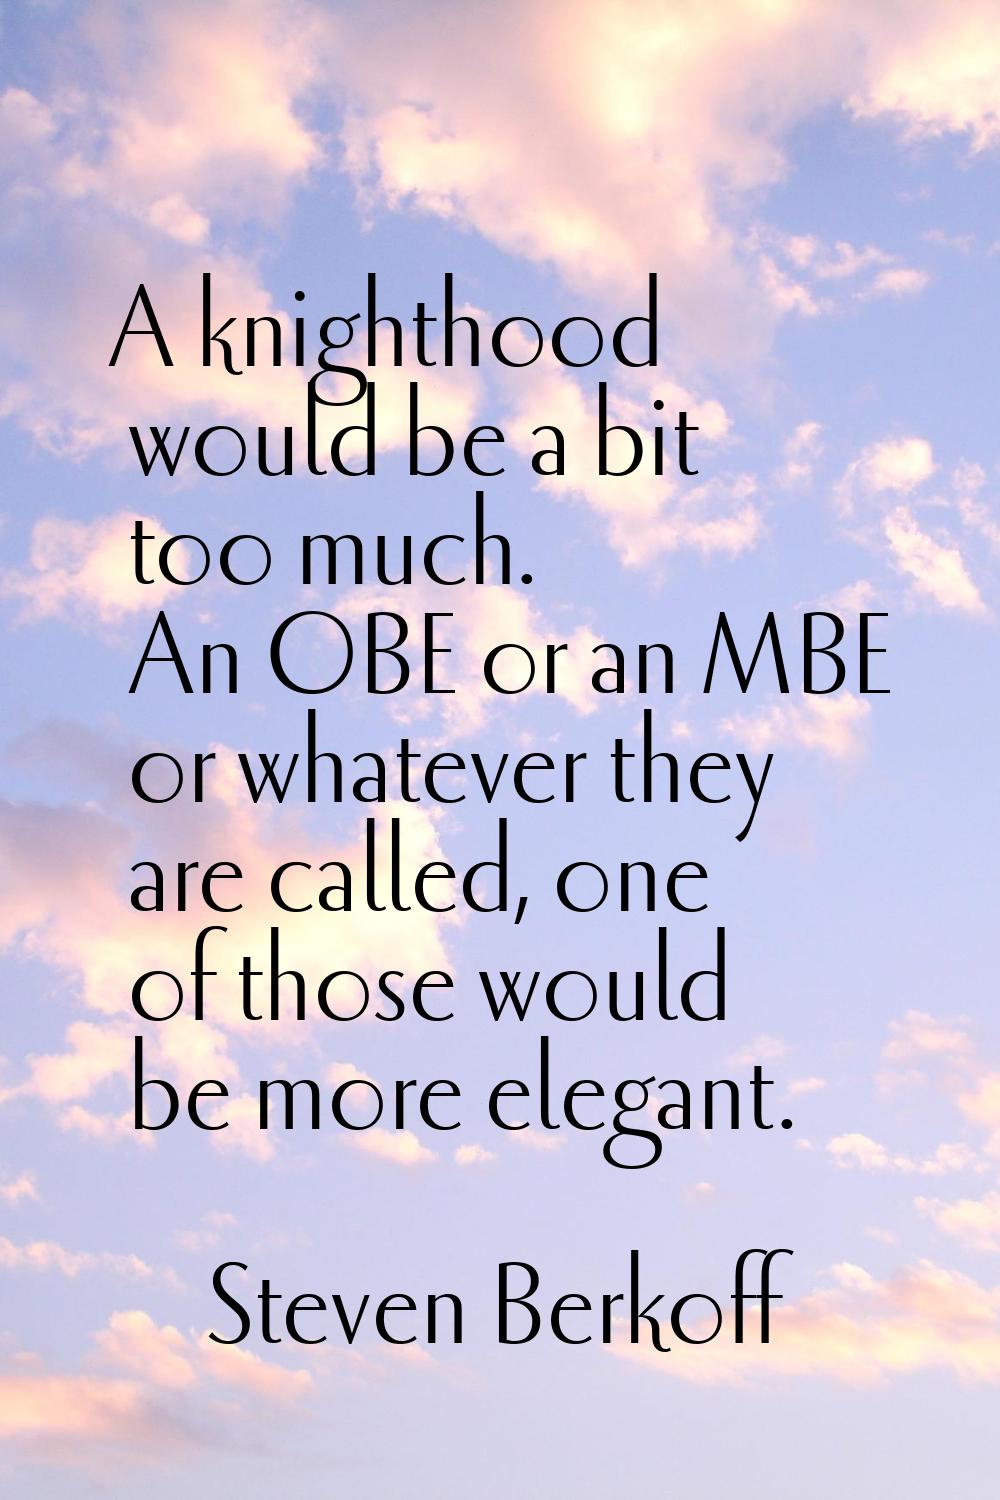 A knighthood would be a bit too much. An OBE or an MBE or whatever they are called, one of those wo